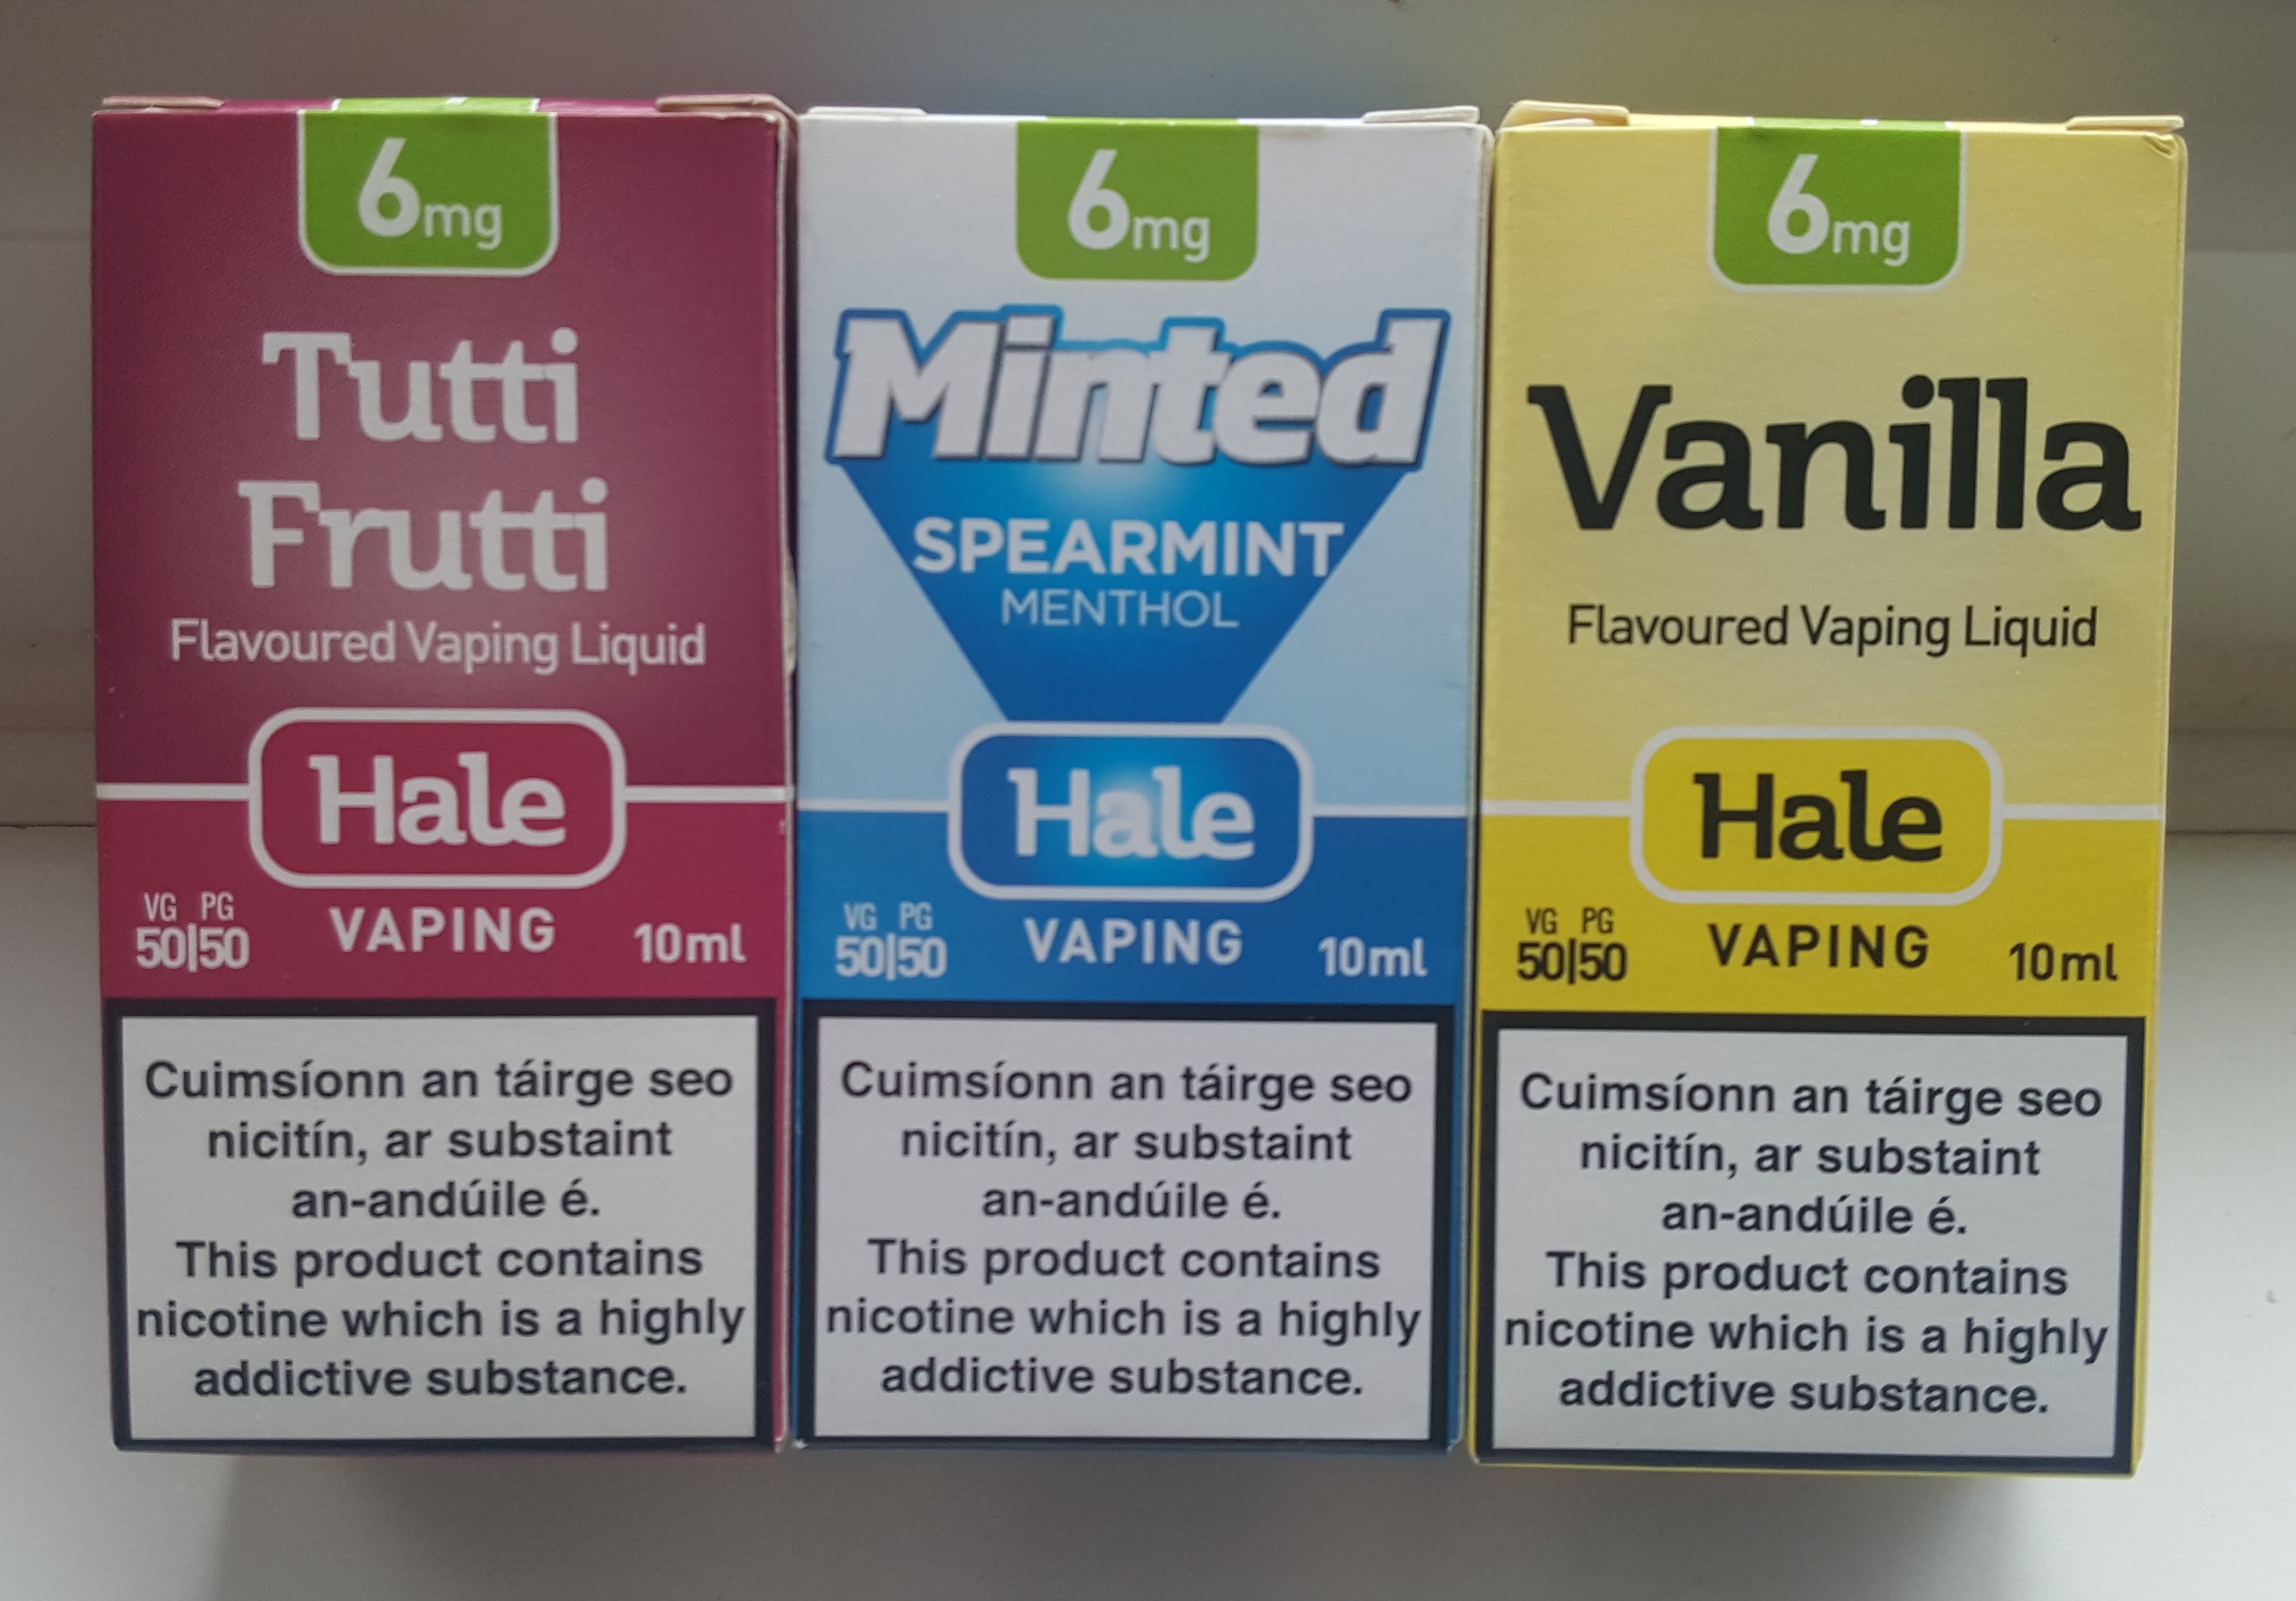 If vaping for weight loss is going to work, are these the right flavours of E-Liquids?